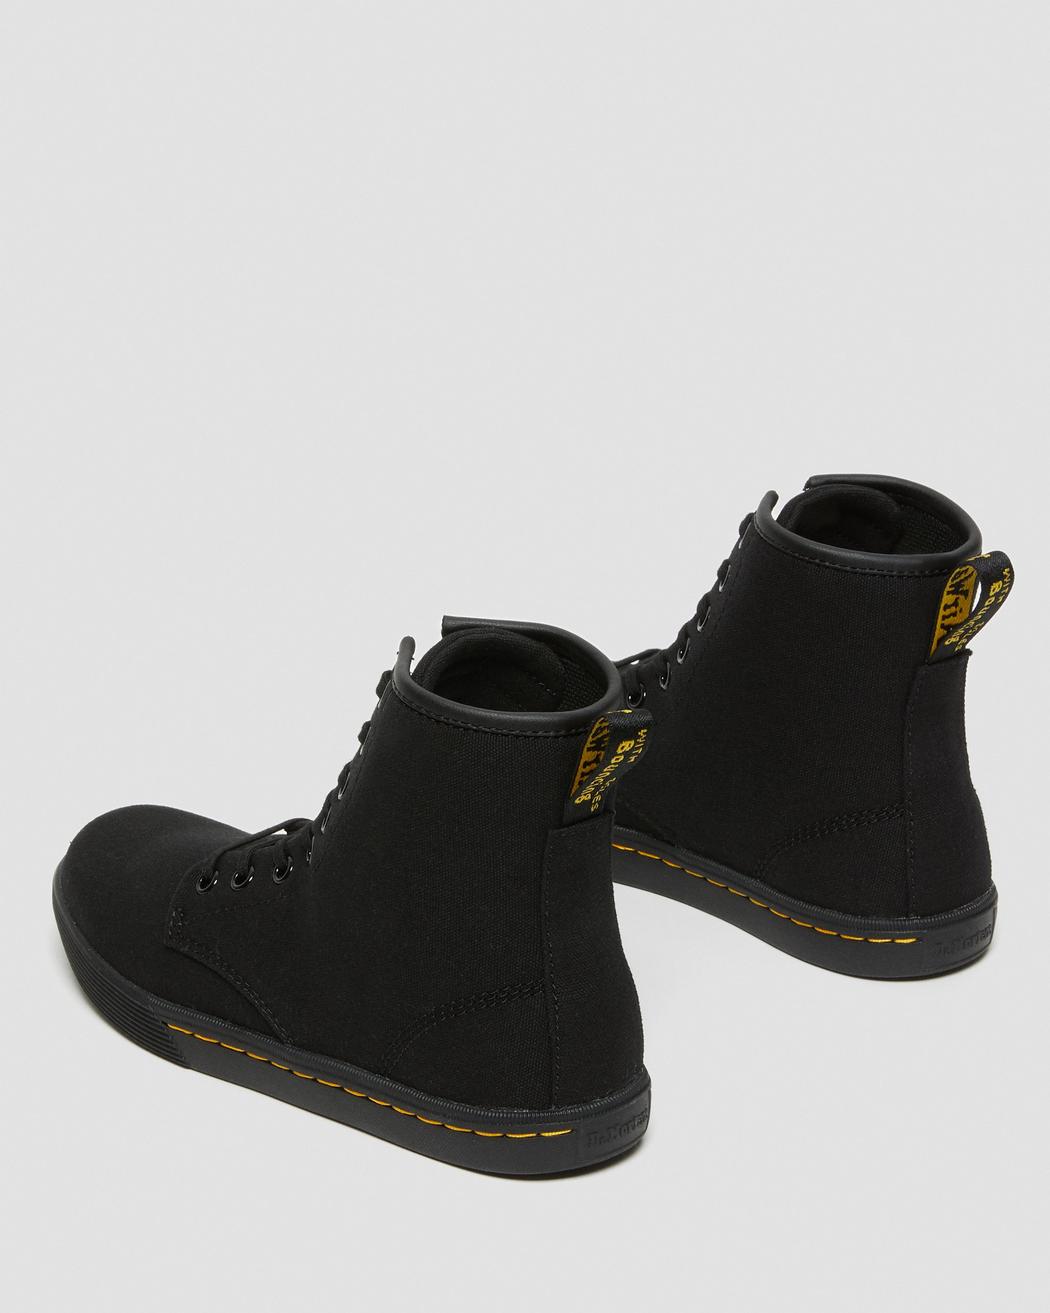 Sheridan Women's Canvas Casual Boots | Dr. Martens